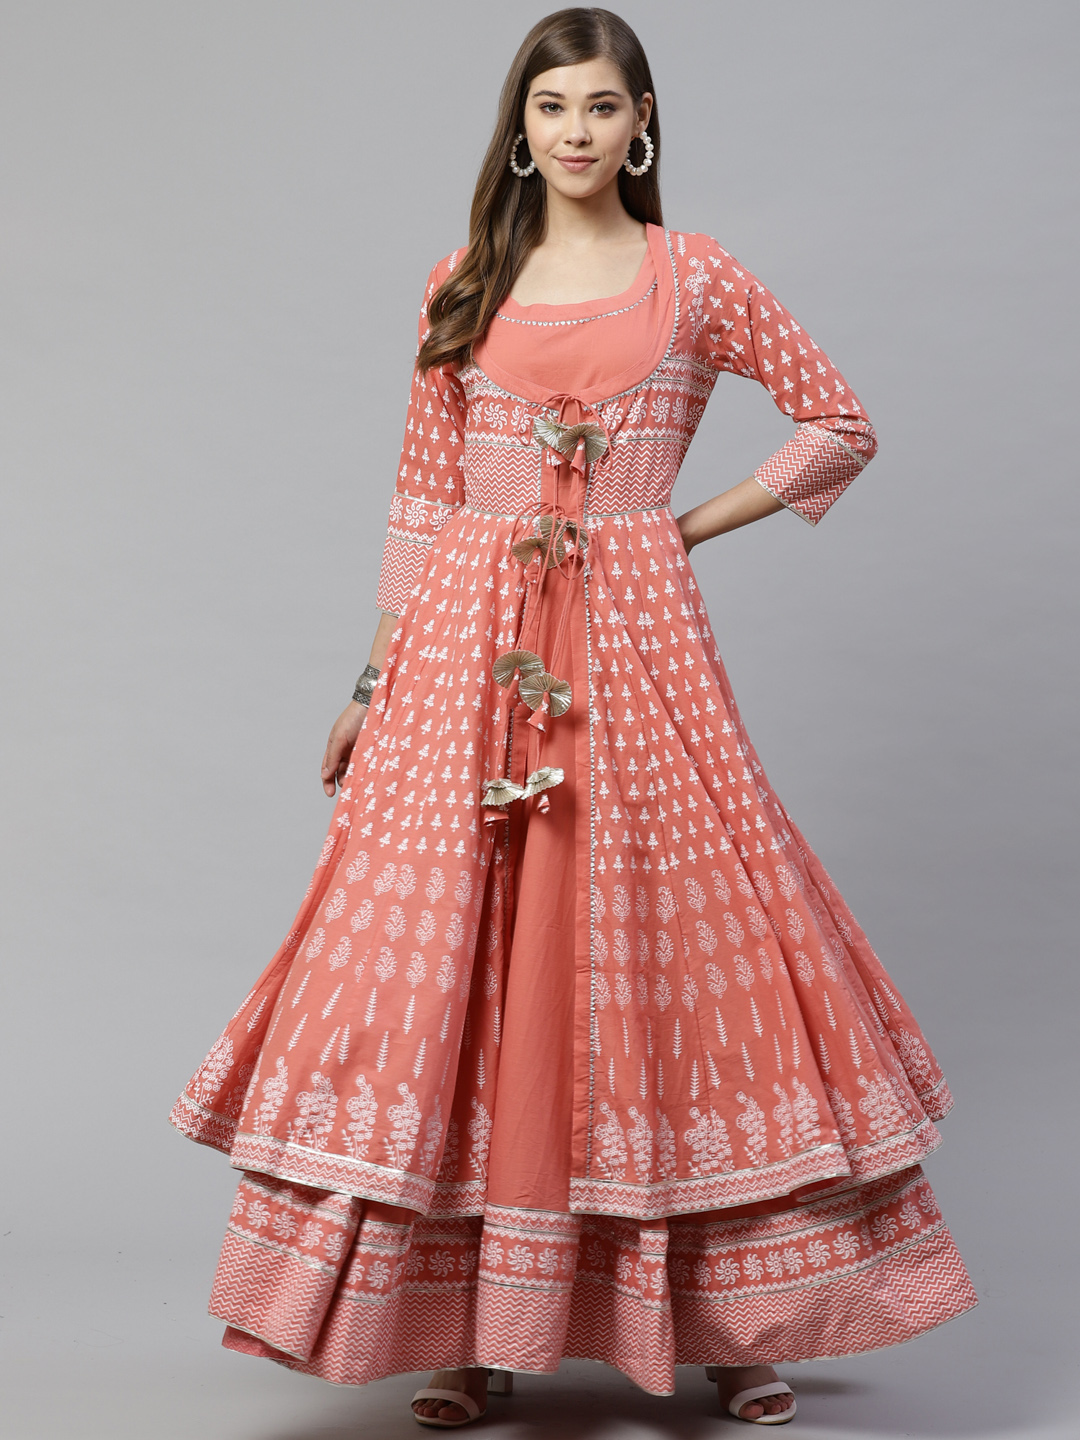 Girls Gown In Moti Bagh